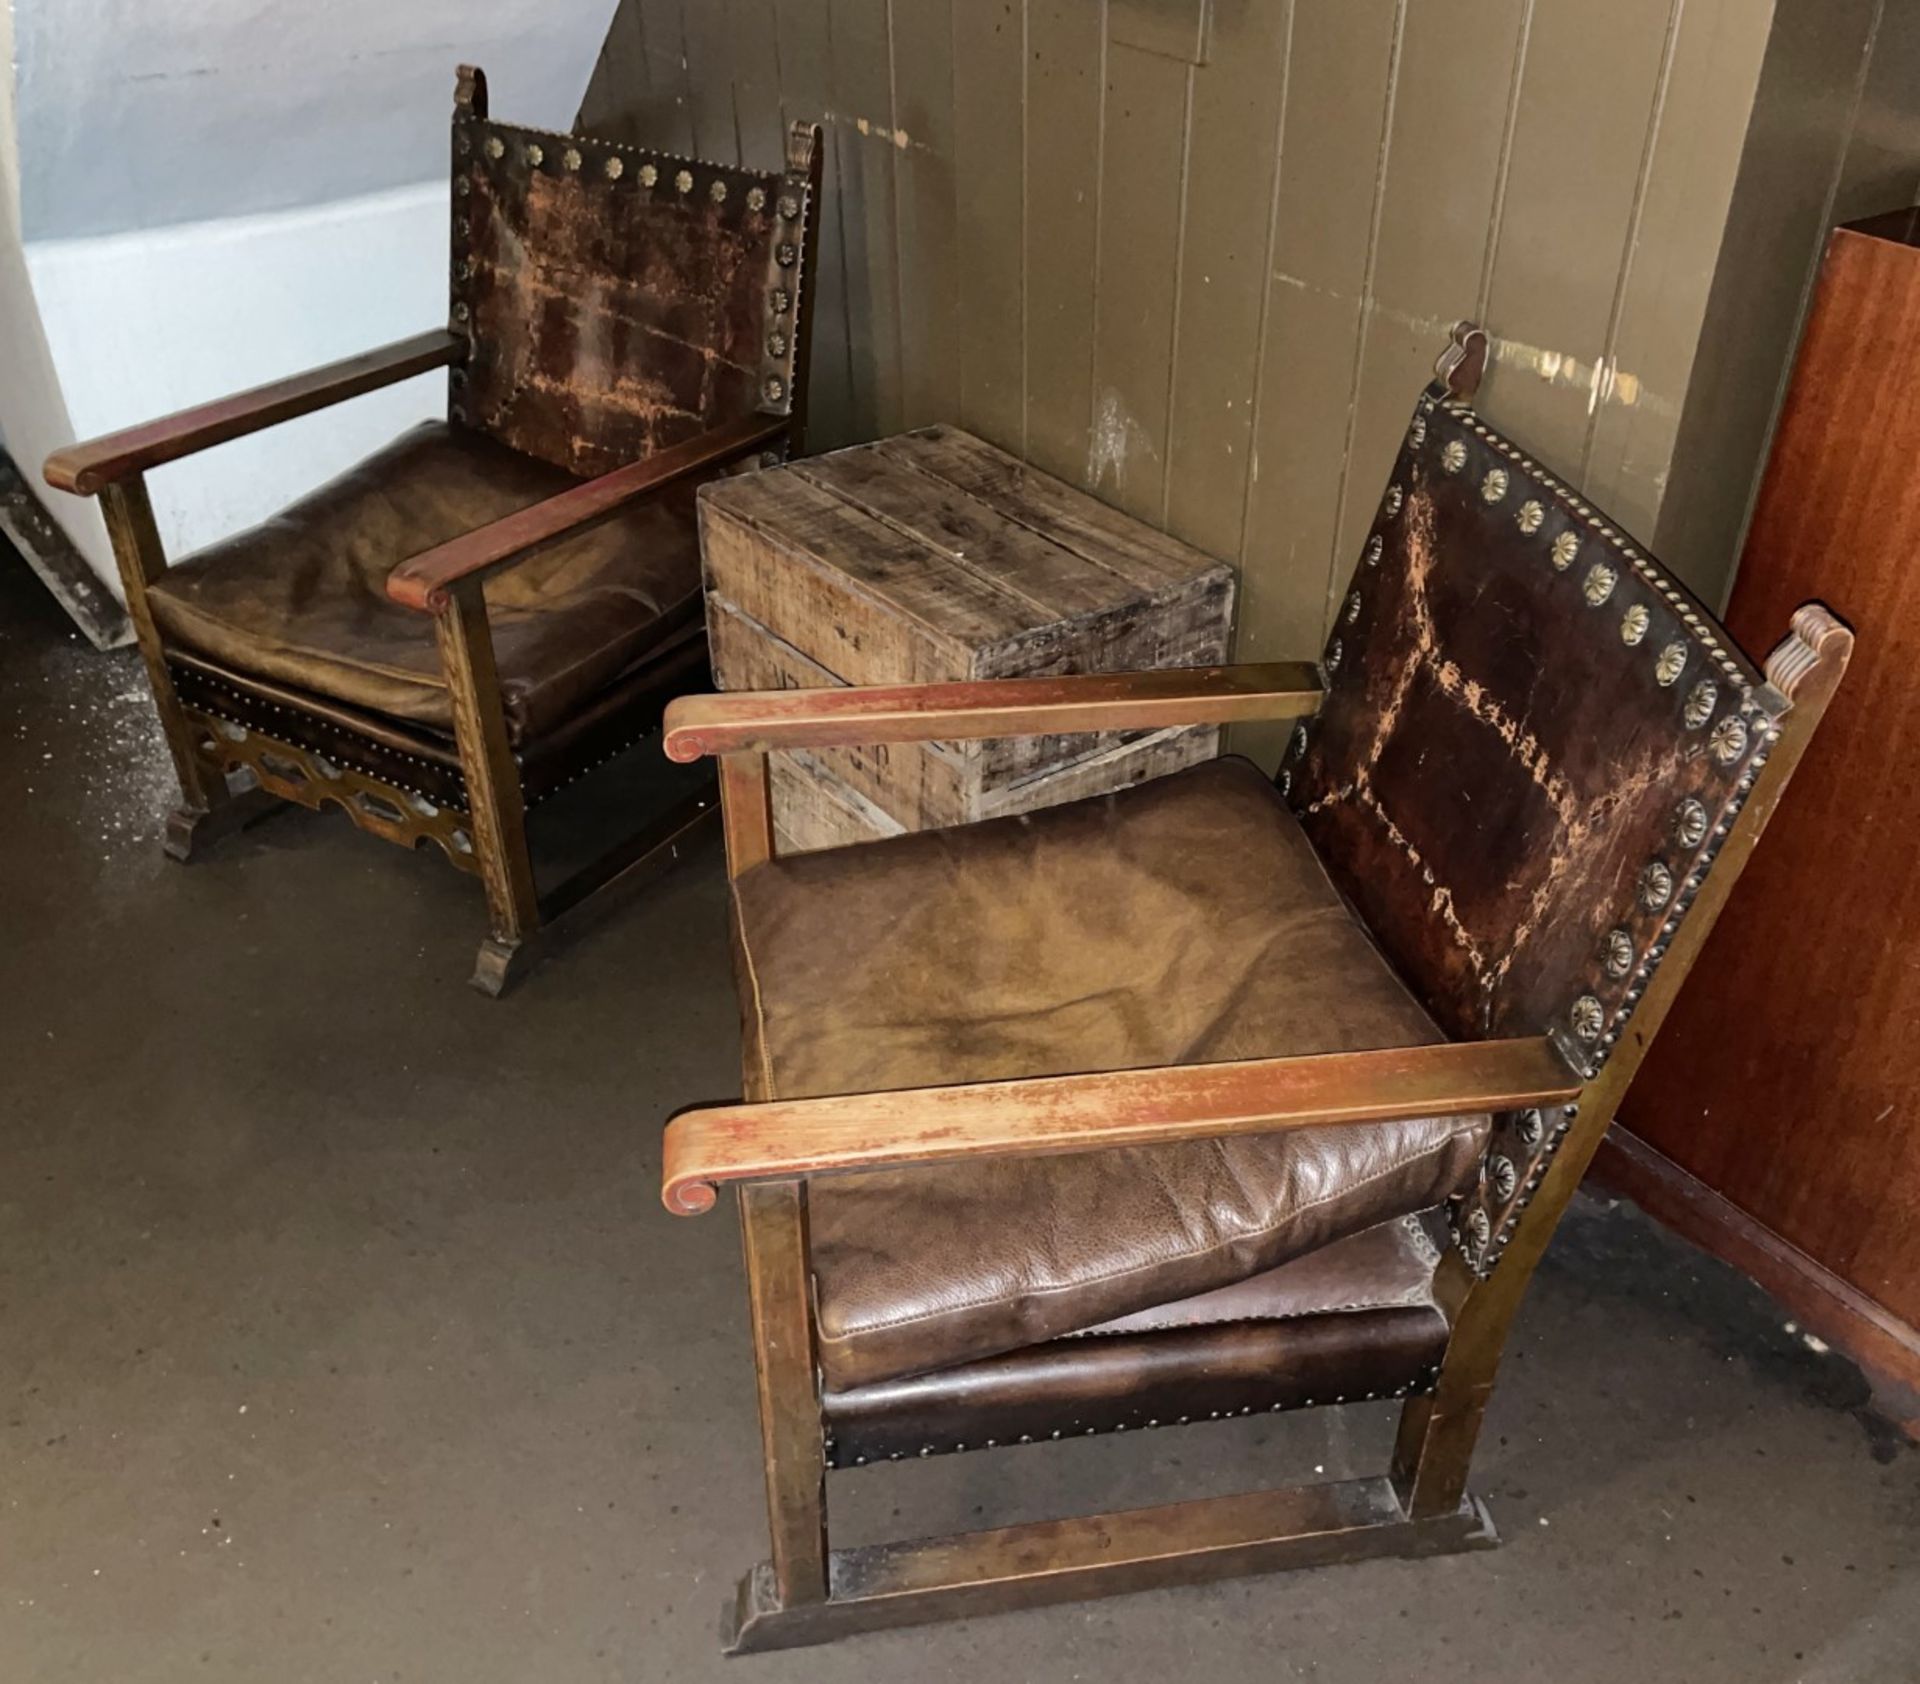 2 x Antique Gothic Revival Heavy Brown Leather Upholstered Wooden Armchairs, and Soap Box - Image 2 of 10